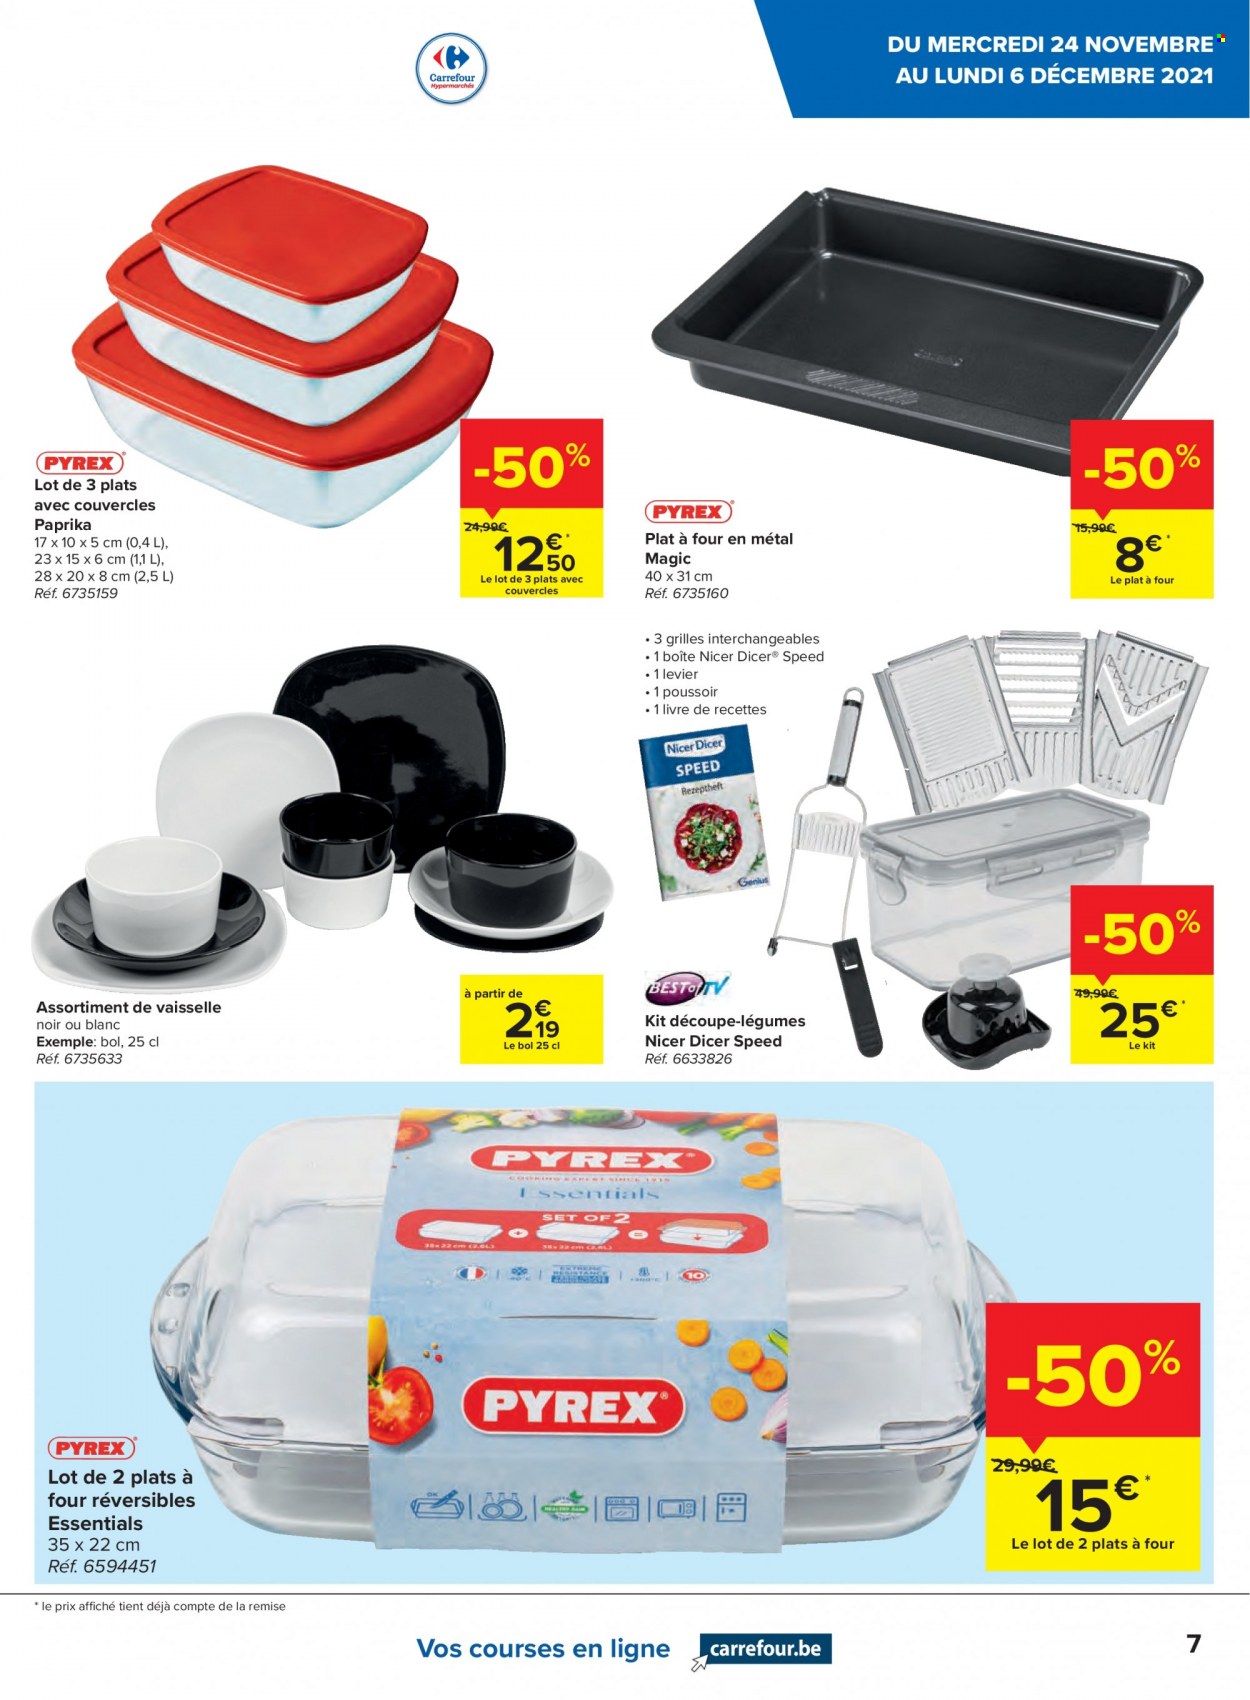 Catalogue Carrefour hypermarkt - 24.11.2021 - 6.12.2021. Page 7.